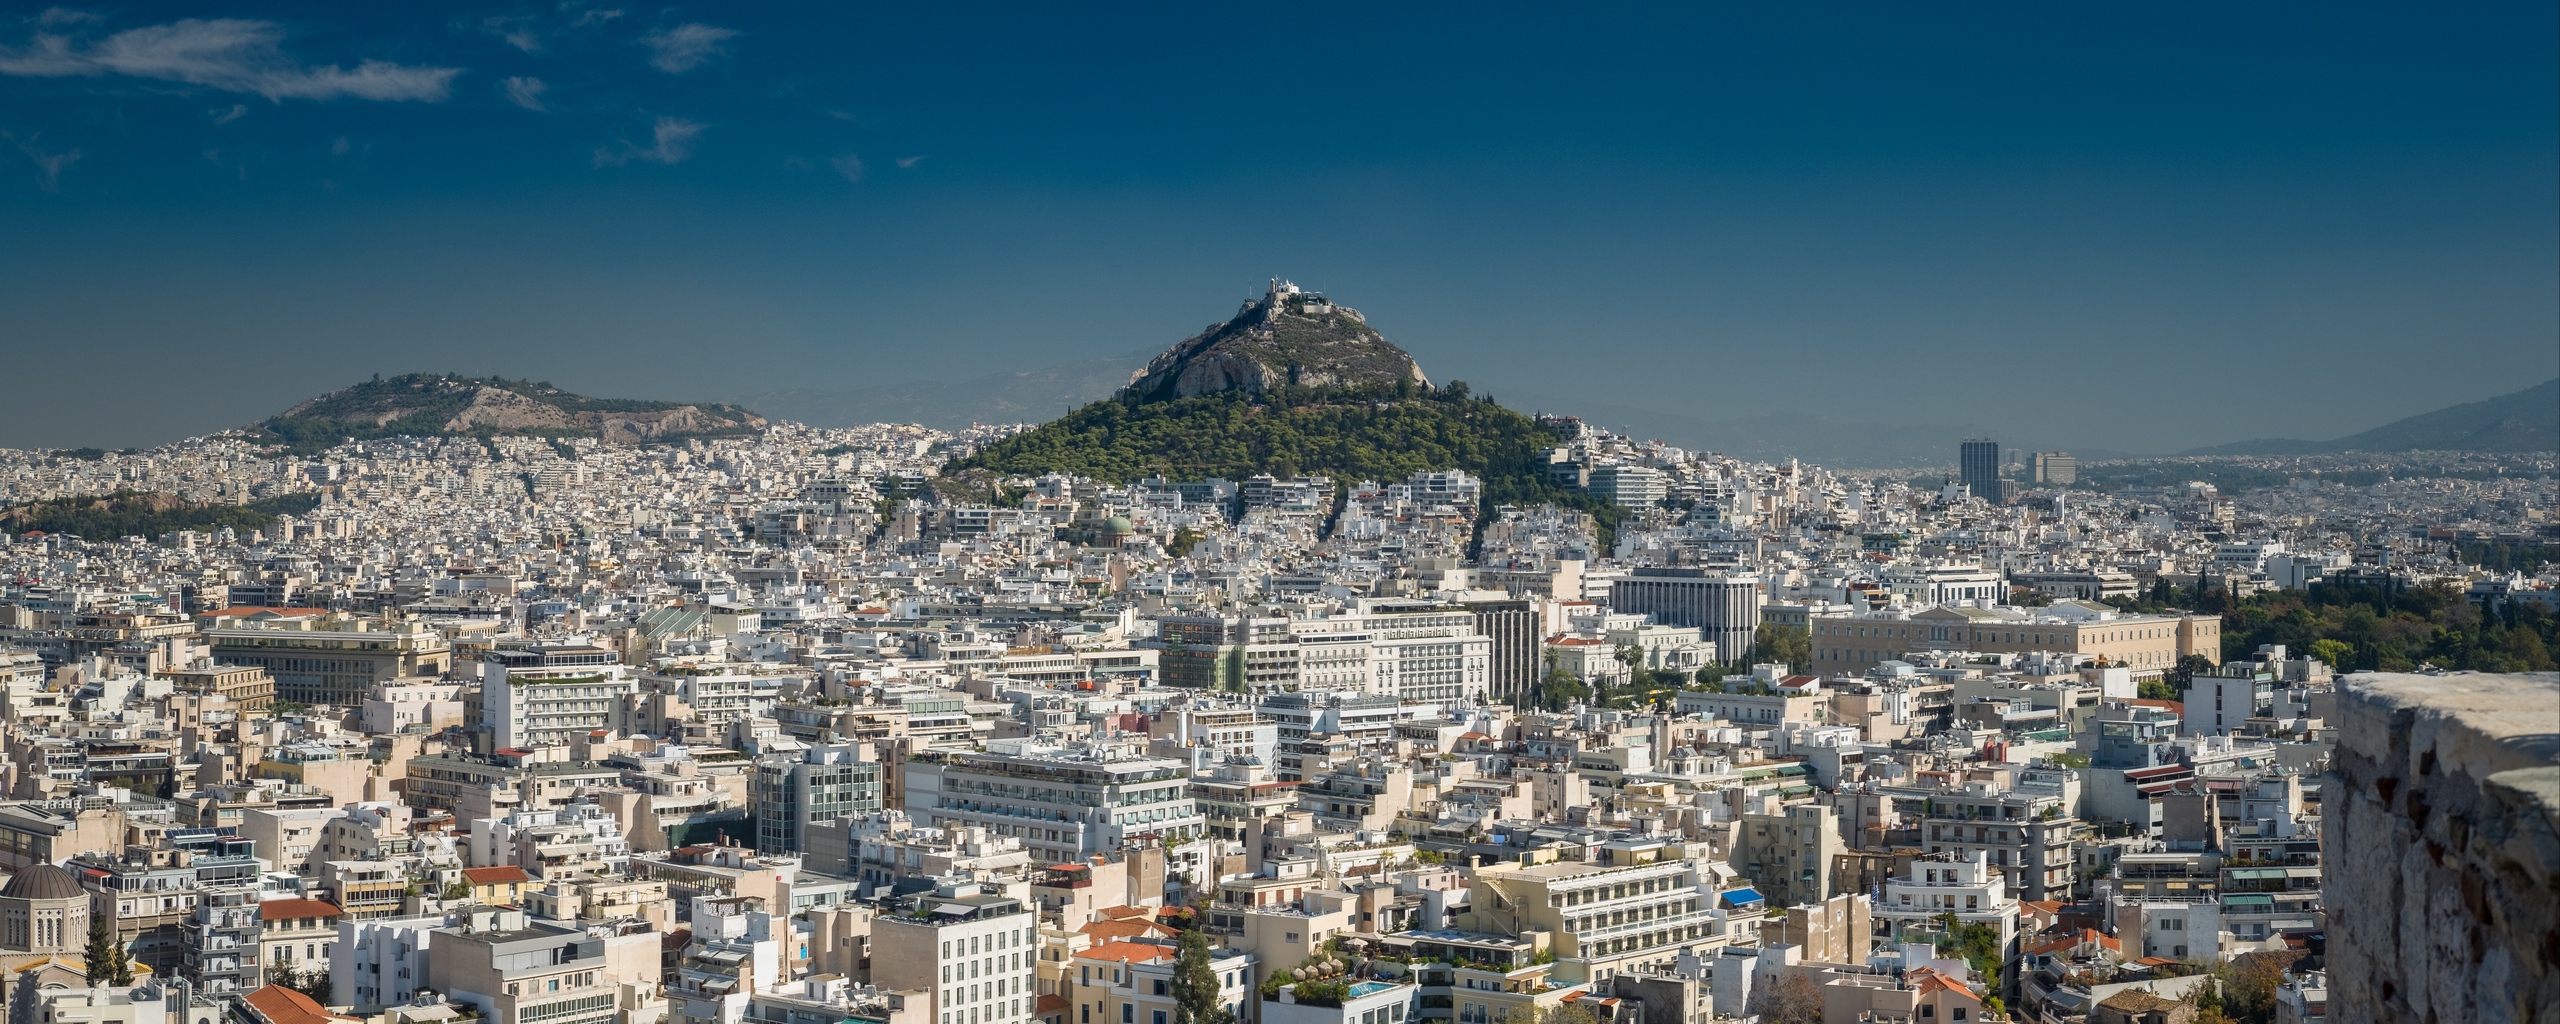 Wallpaper City, View From Above, Buildings, Athens, - Mount Lycabettus - HD Wallpaper 